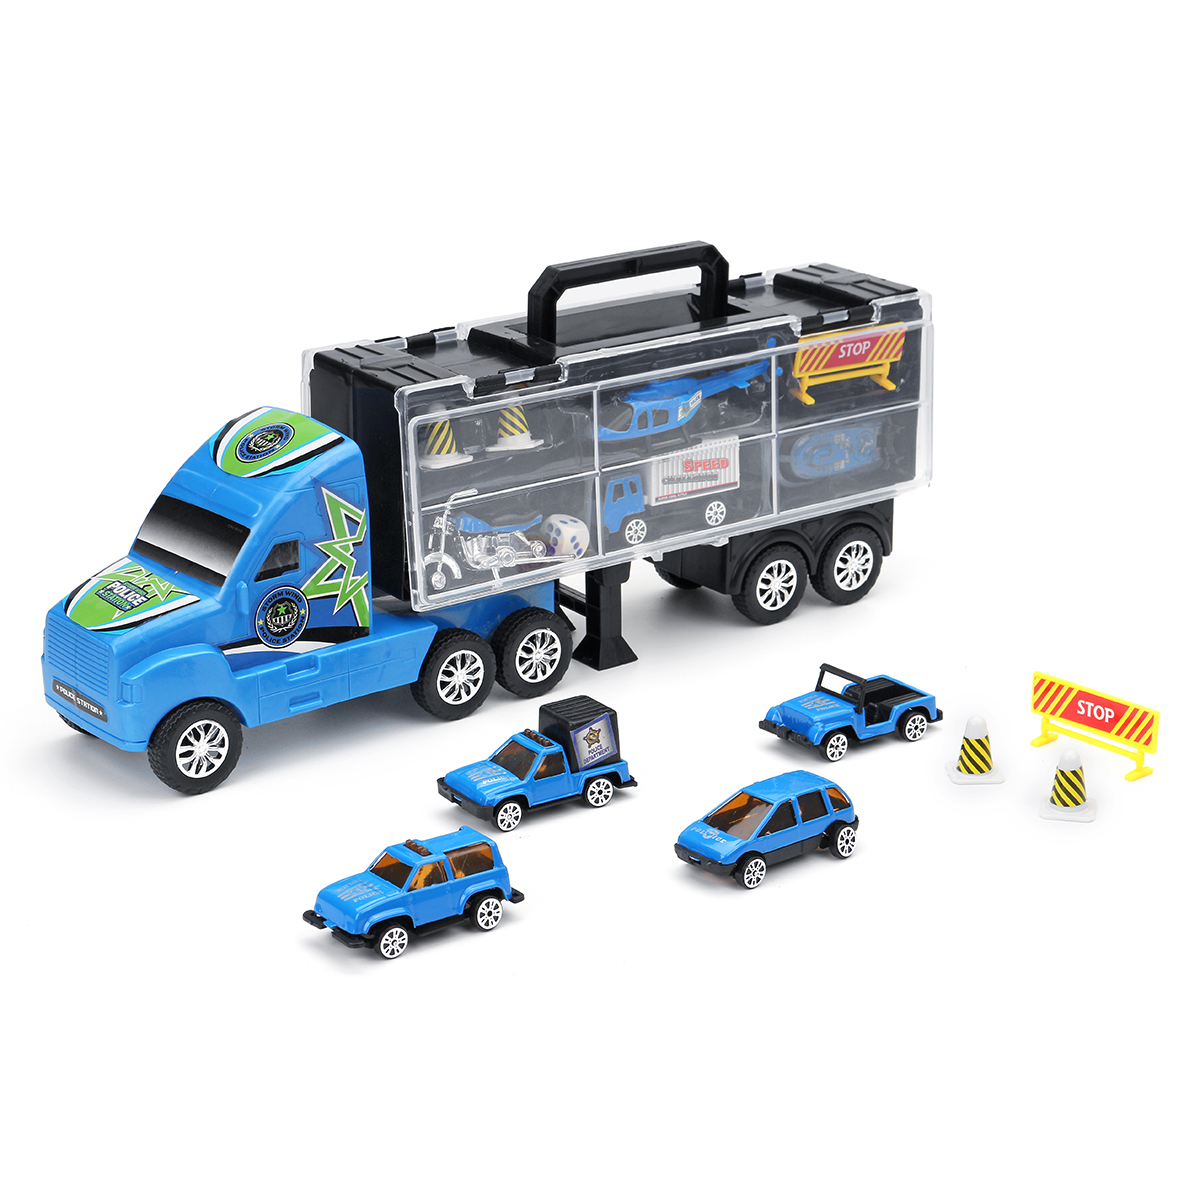 Alloy-Trailer-Container-Car-Storage-Box-Diecast-Car-Model-Set-Toy-for-Childrens-Gift-1635959-10